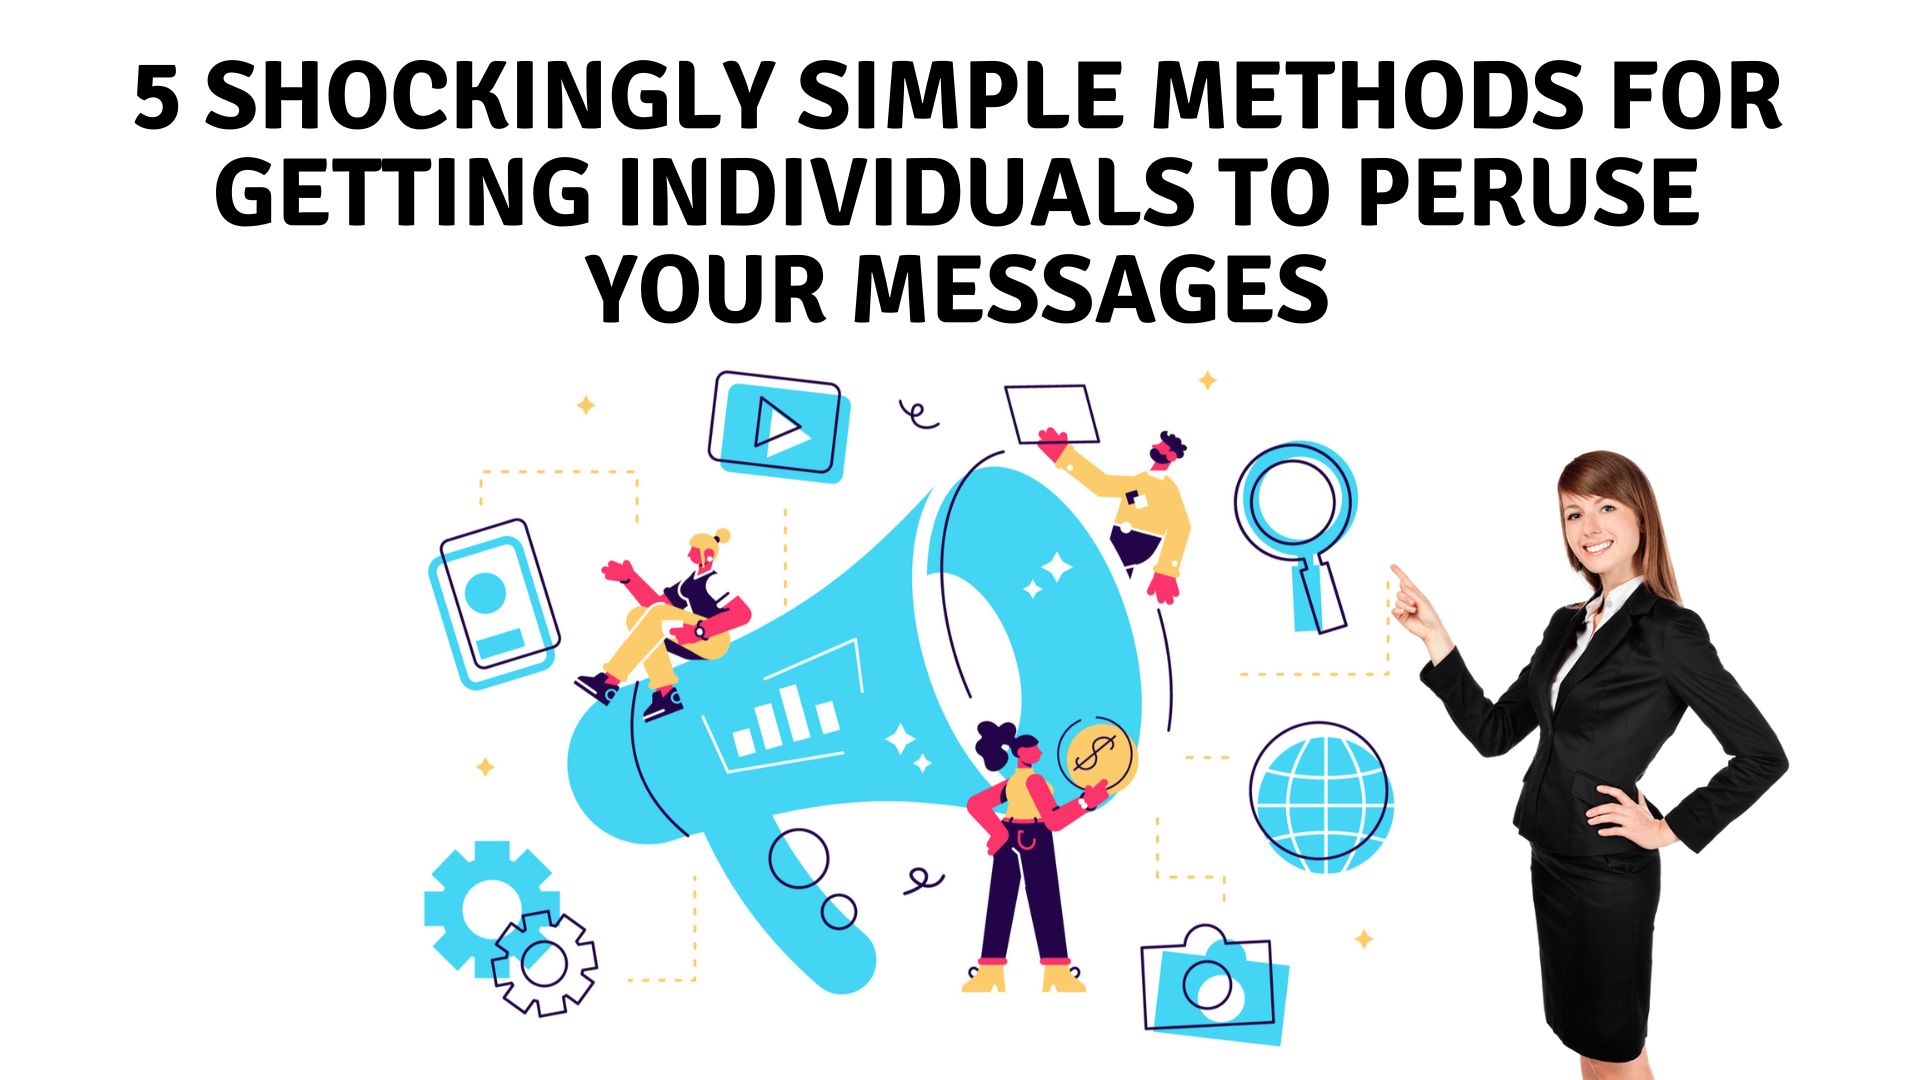 5 shockingly simple methods for getting individuals to peruse your messages